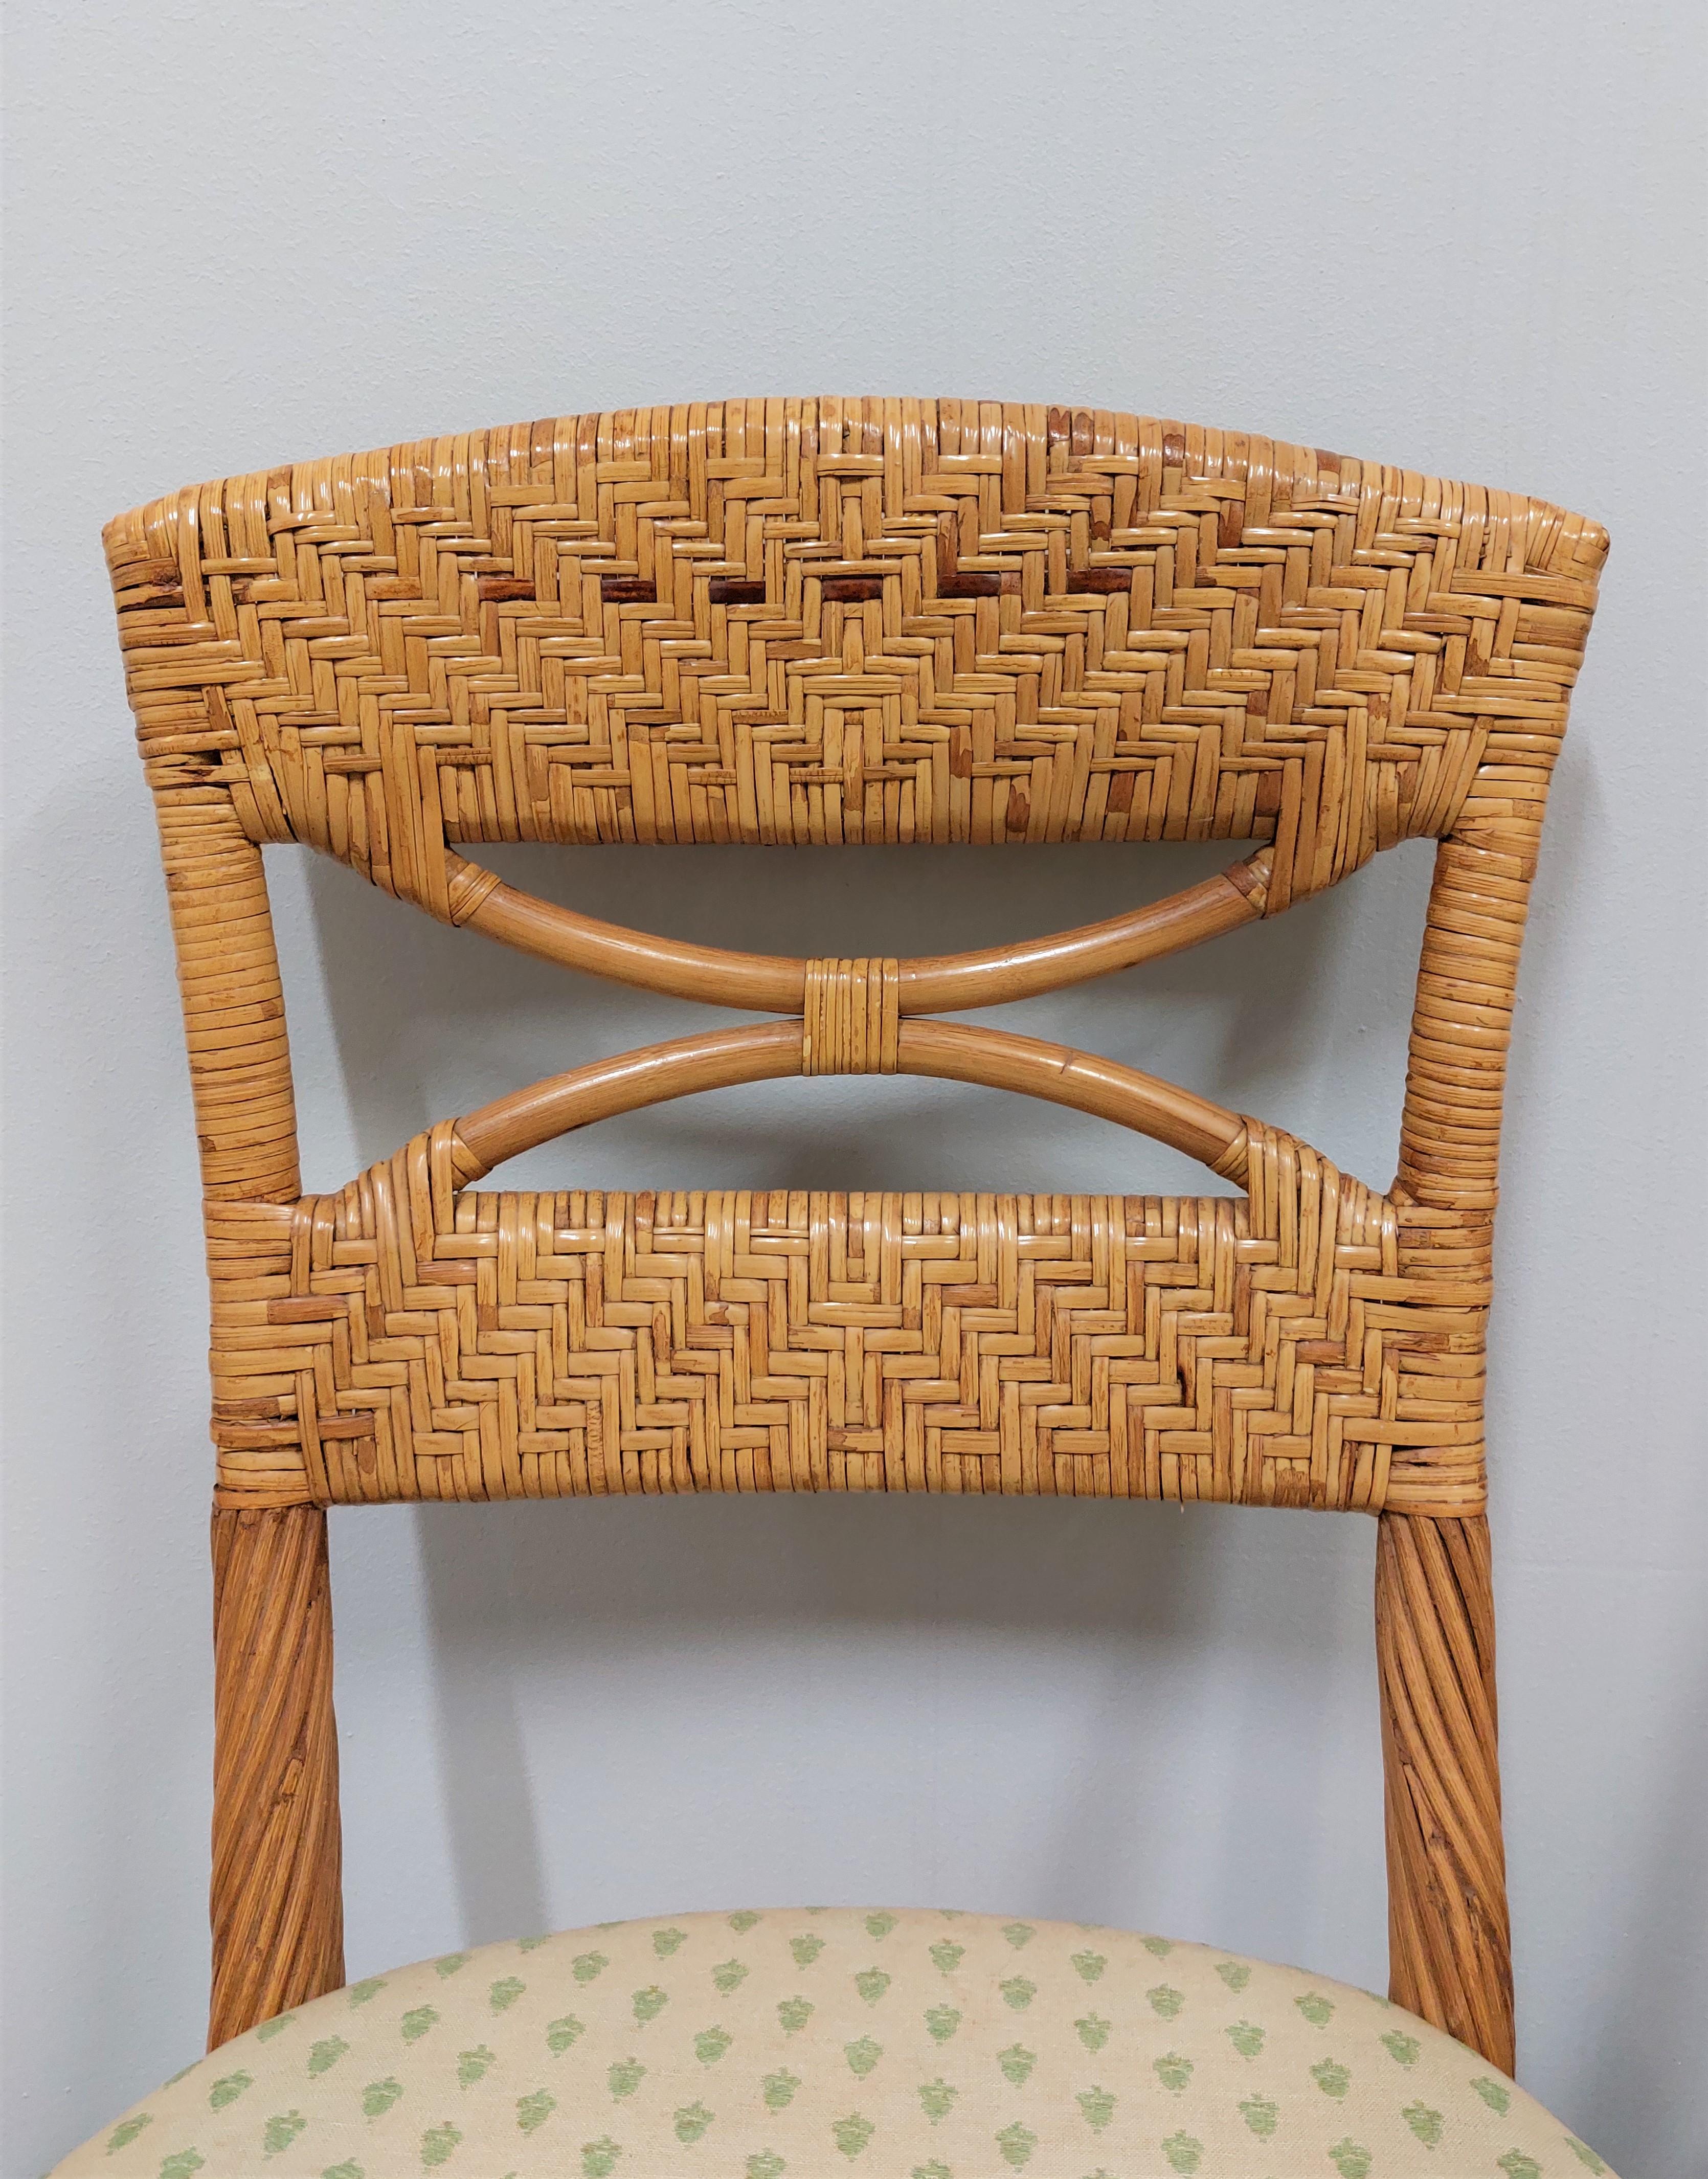 Dining Room Chairs Wicker Fabric Vivai del Sud Midcentury Italy 1980s Set of 4 For Sale 4